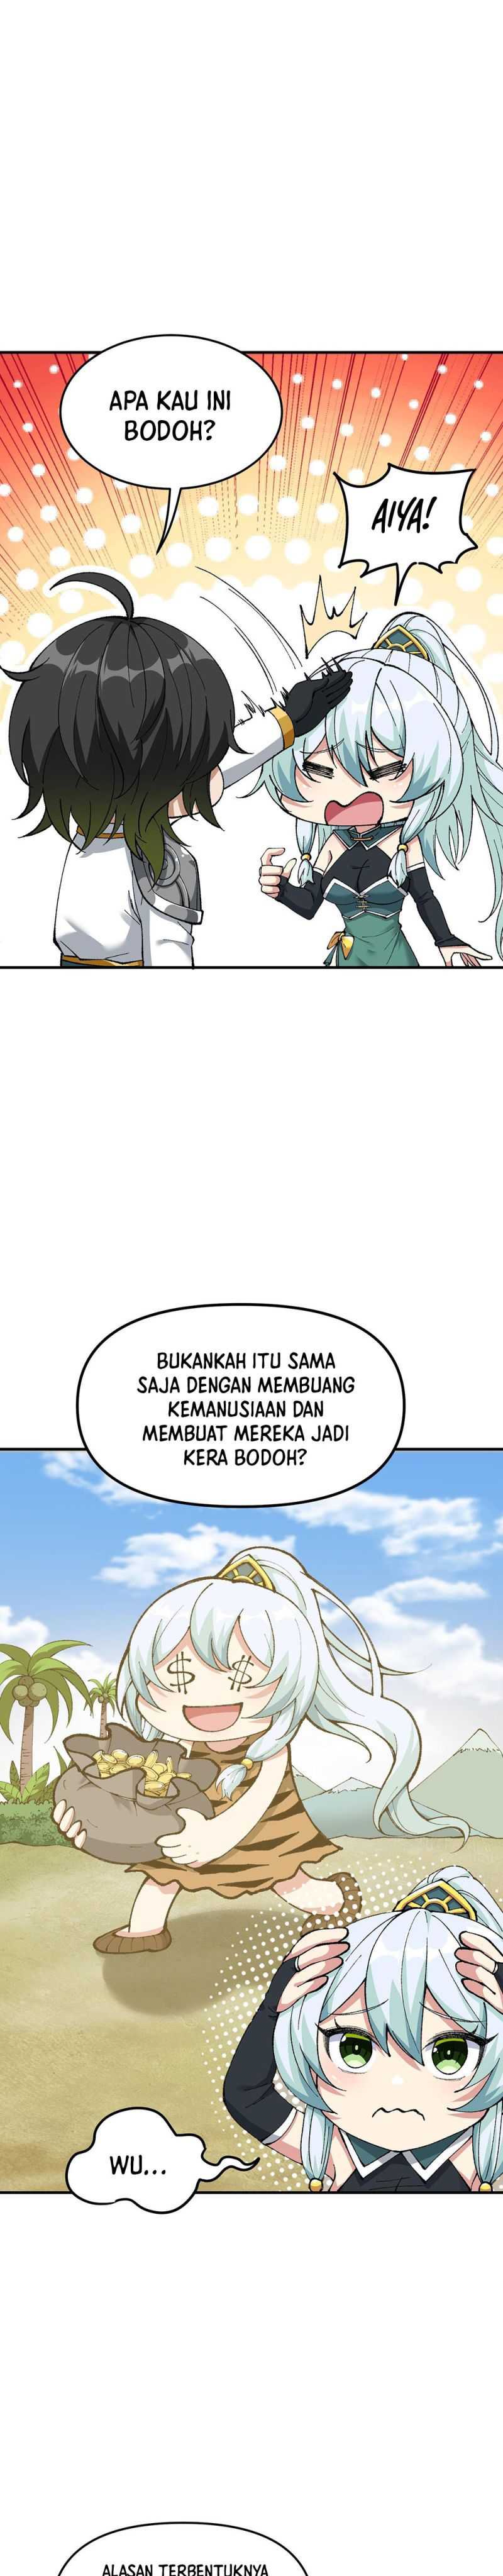 The Heavenly Path Is Not Stupid Chapter 03